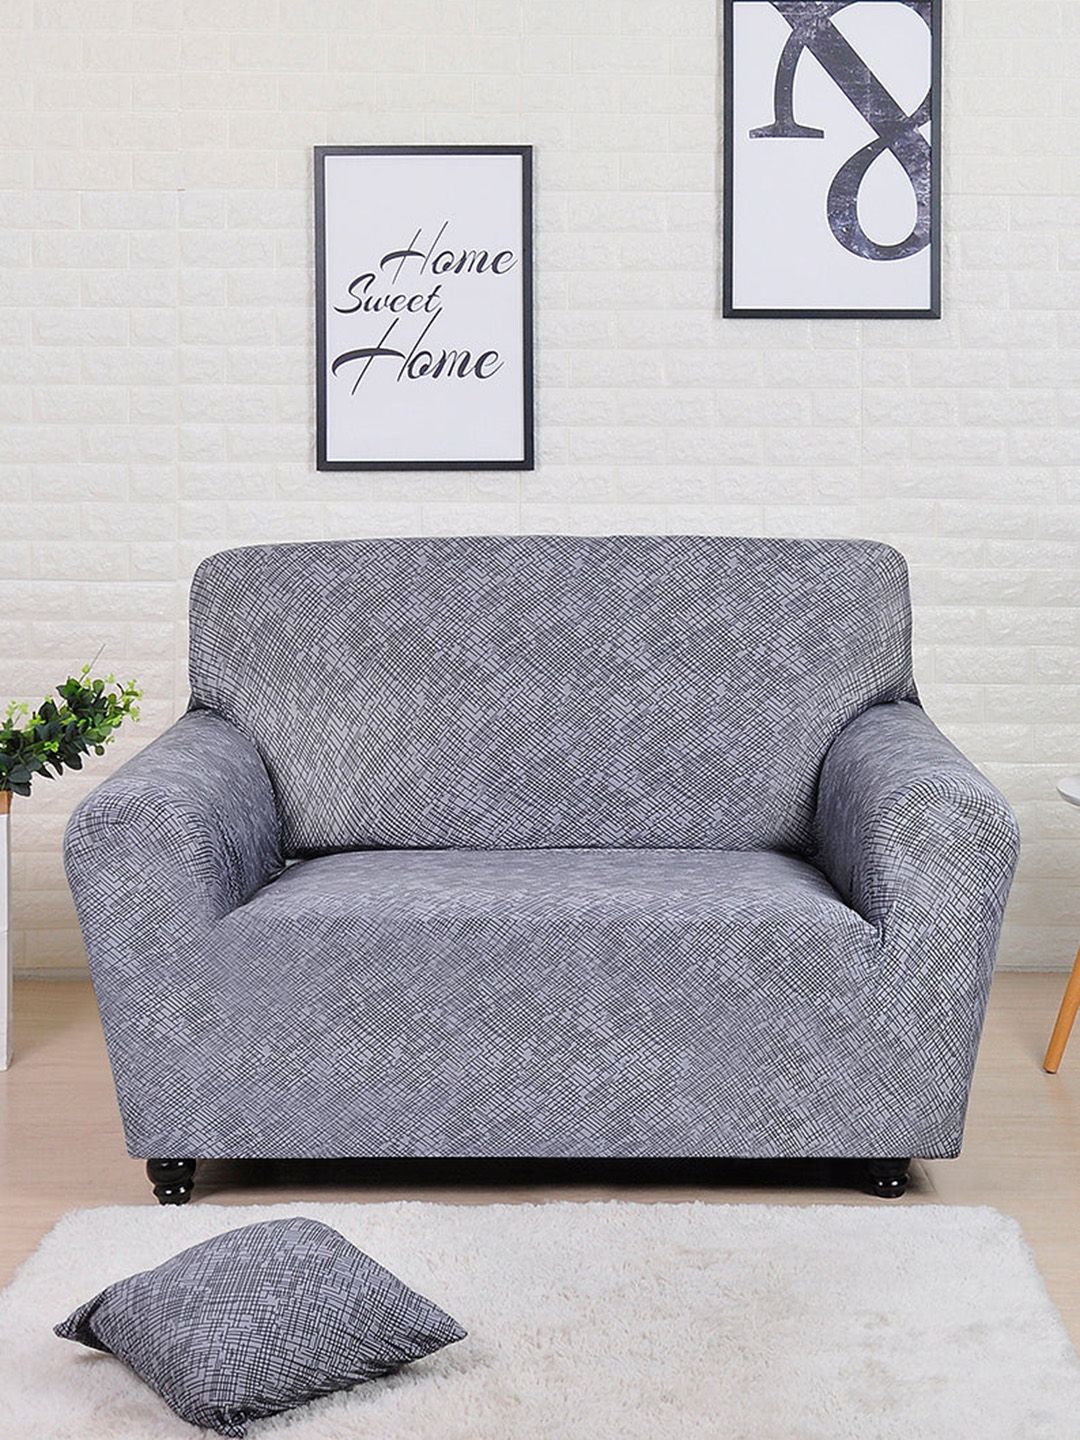 Athome by Nilkamal Grey Printed 2 Seater Sofa Covers Price in India